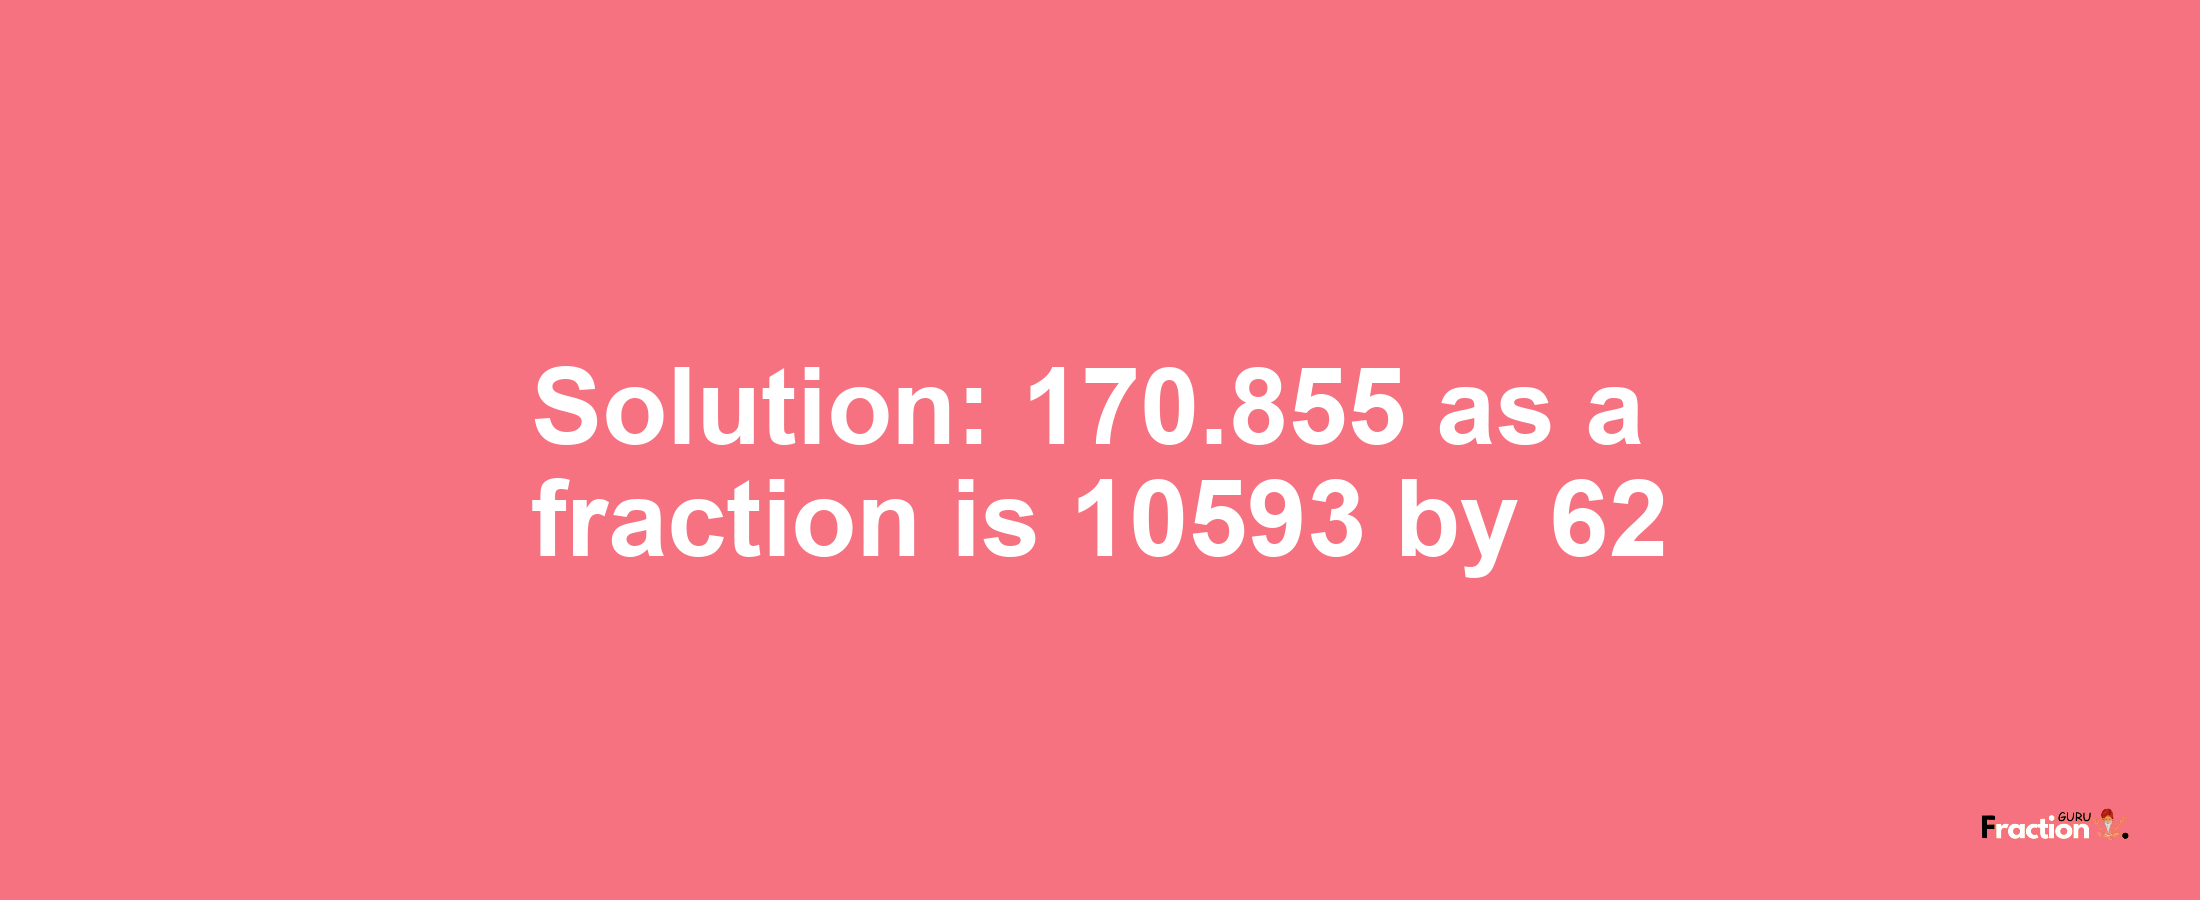 Solution:170.855 as a fraction is 10593/62